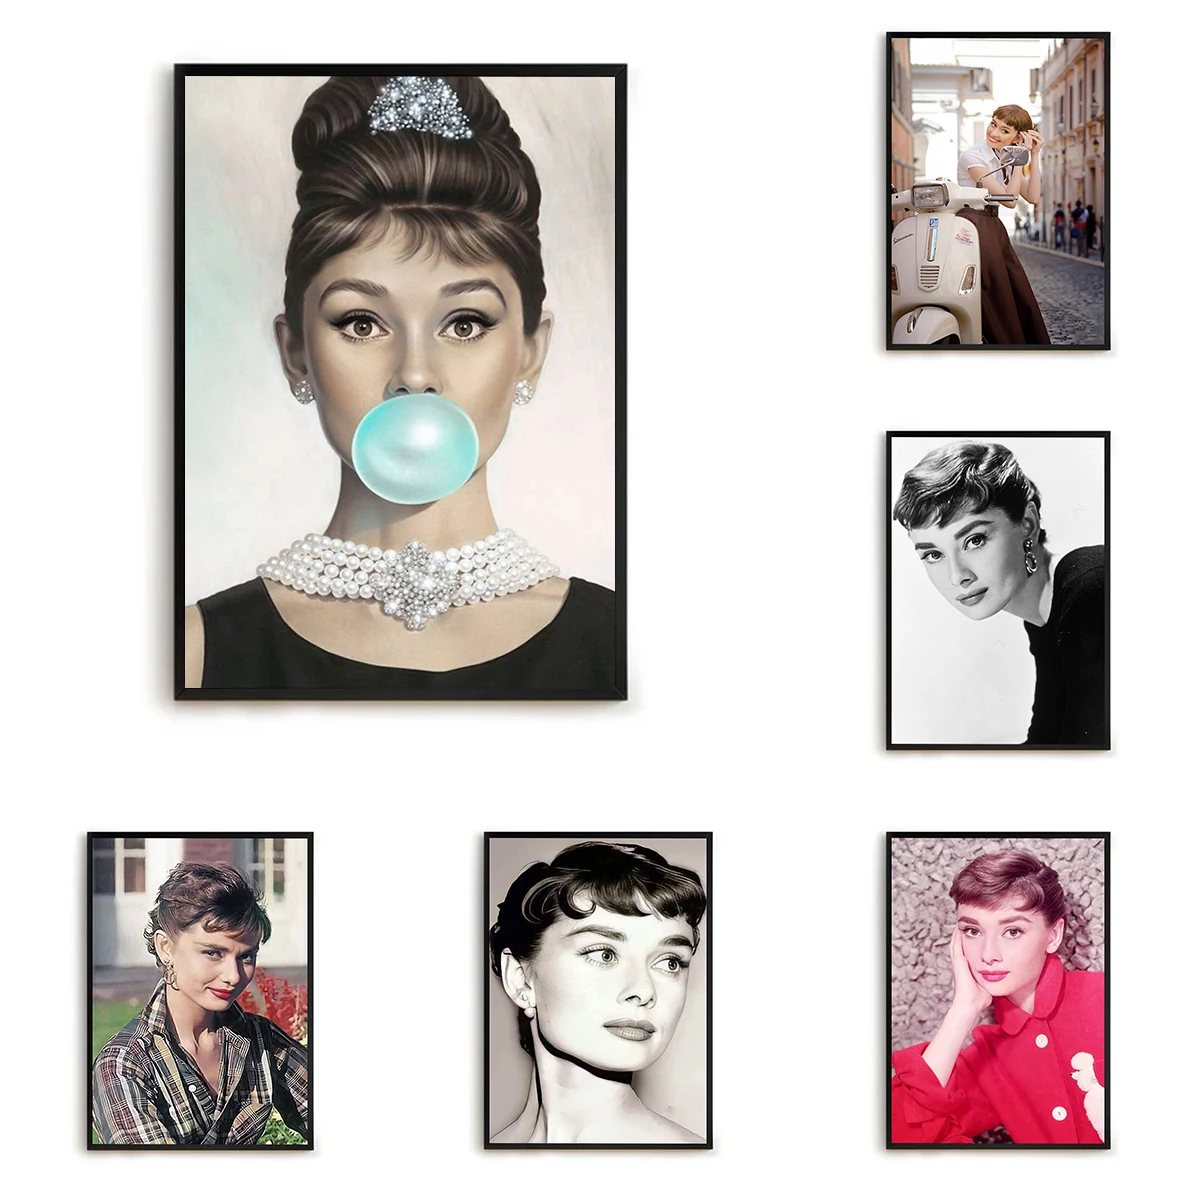 

Picture on the Wall Decor Classical Audrey Hepburn Decor for Room Decorative Prints Wall Painting Bedroom Decoration Poster Art